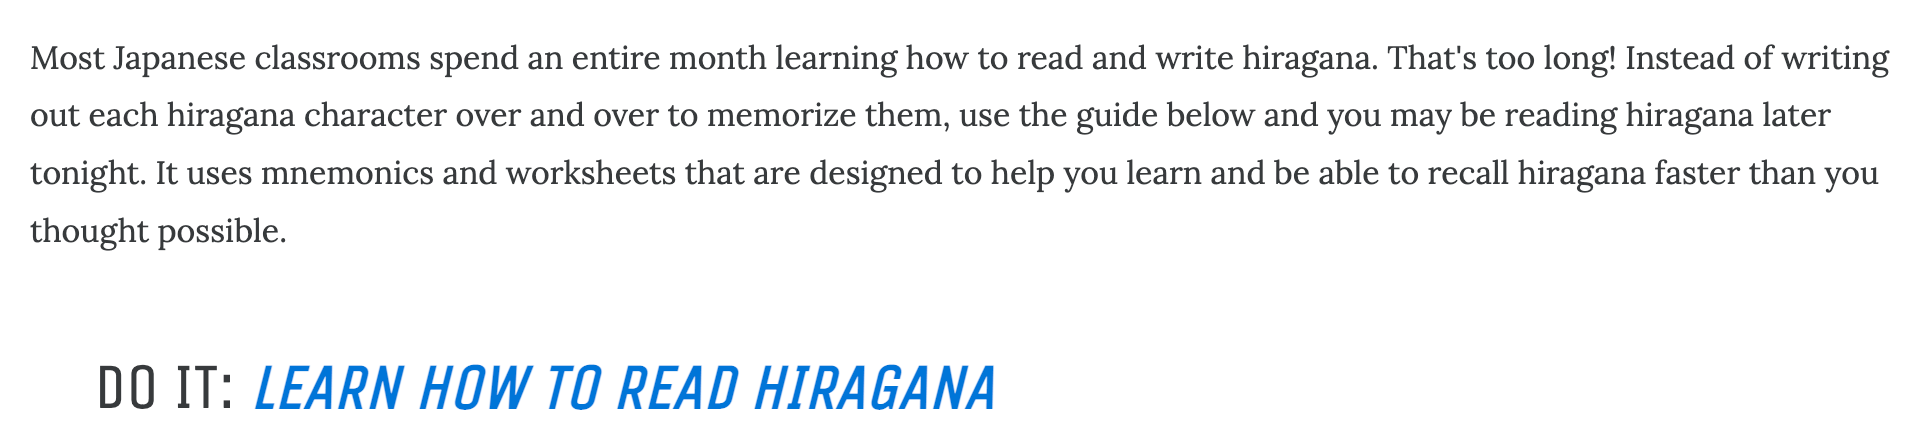 CTA encouraging user to head to the next task of learning to read hiragana
